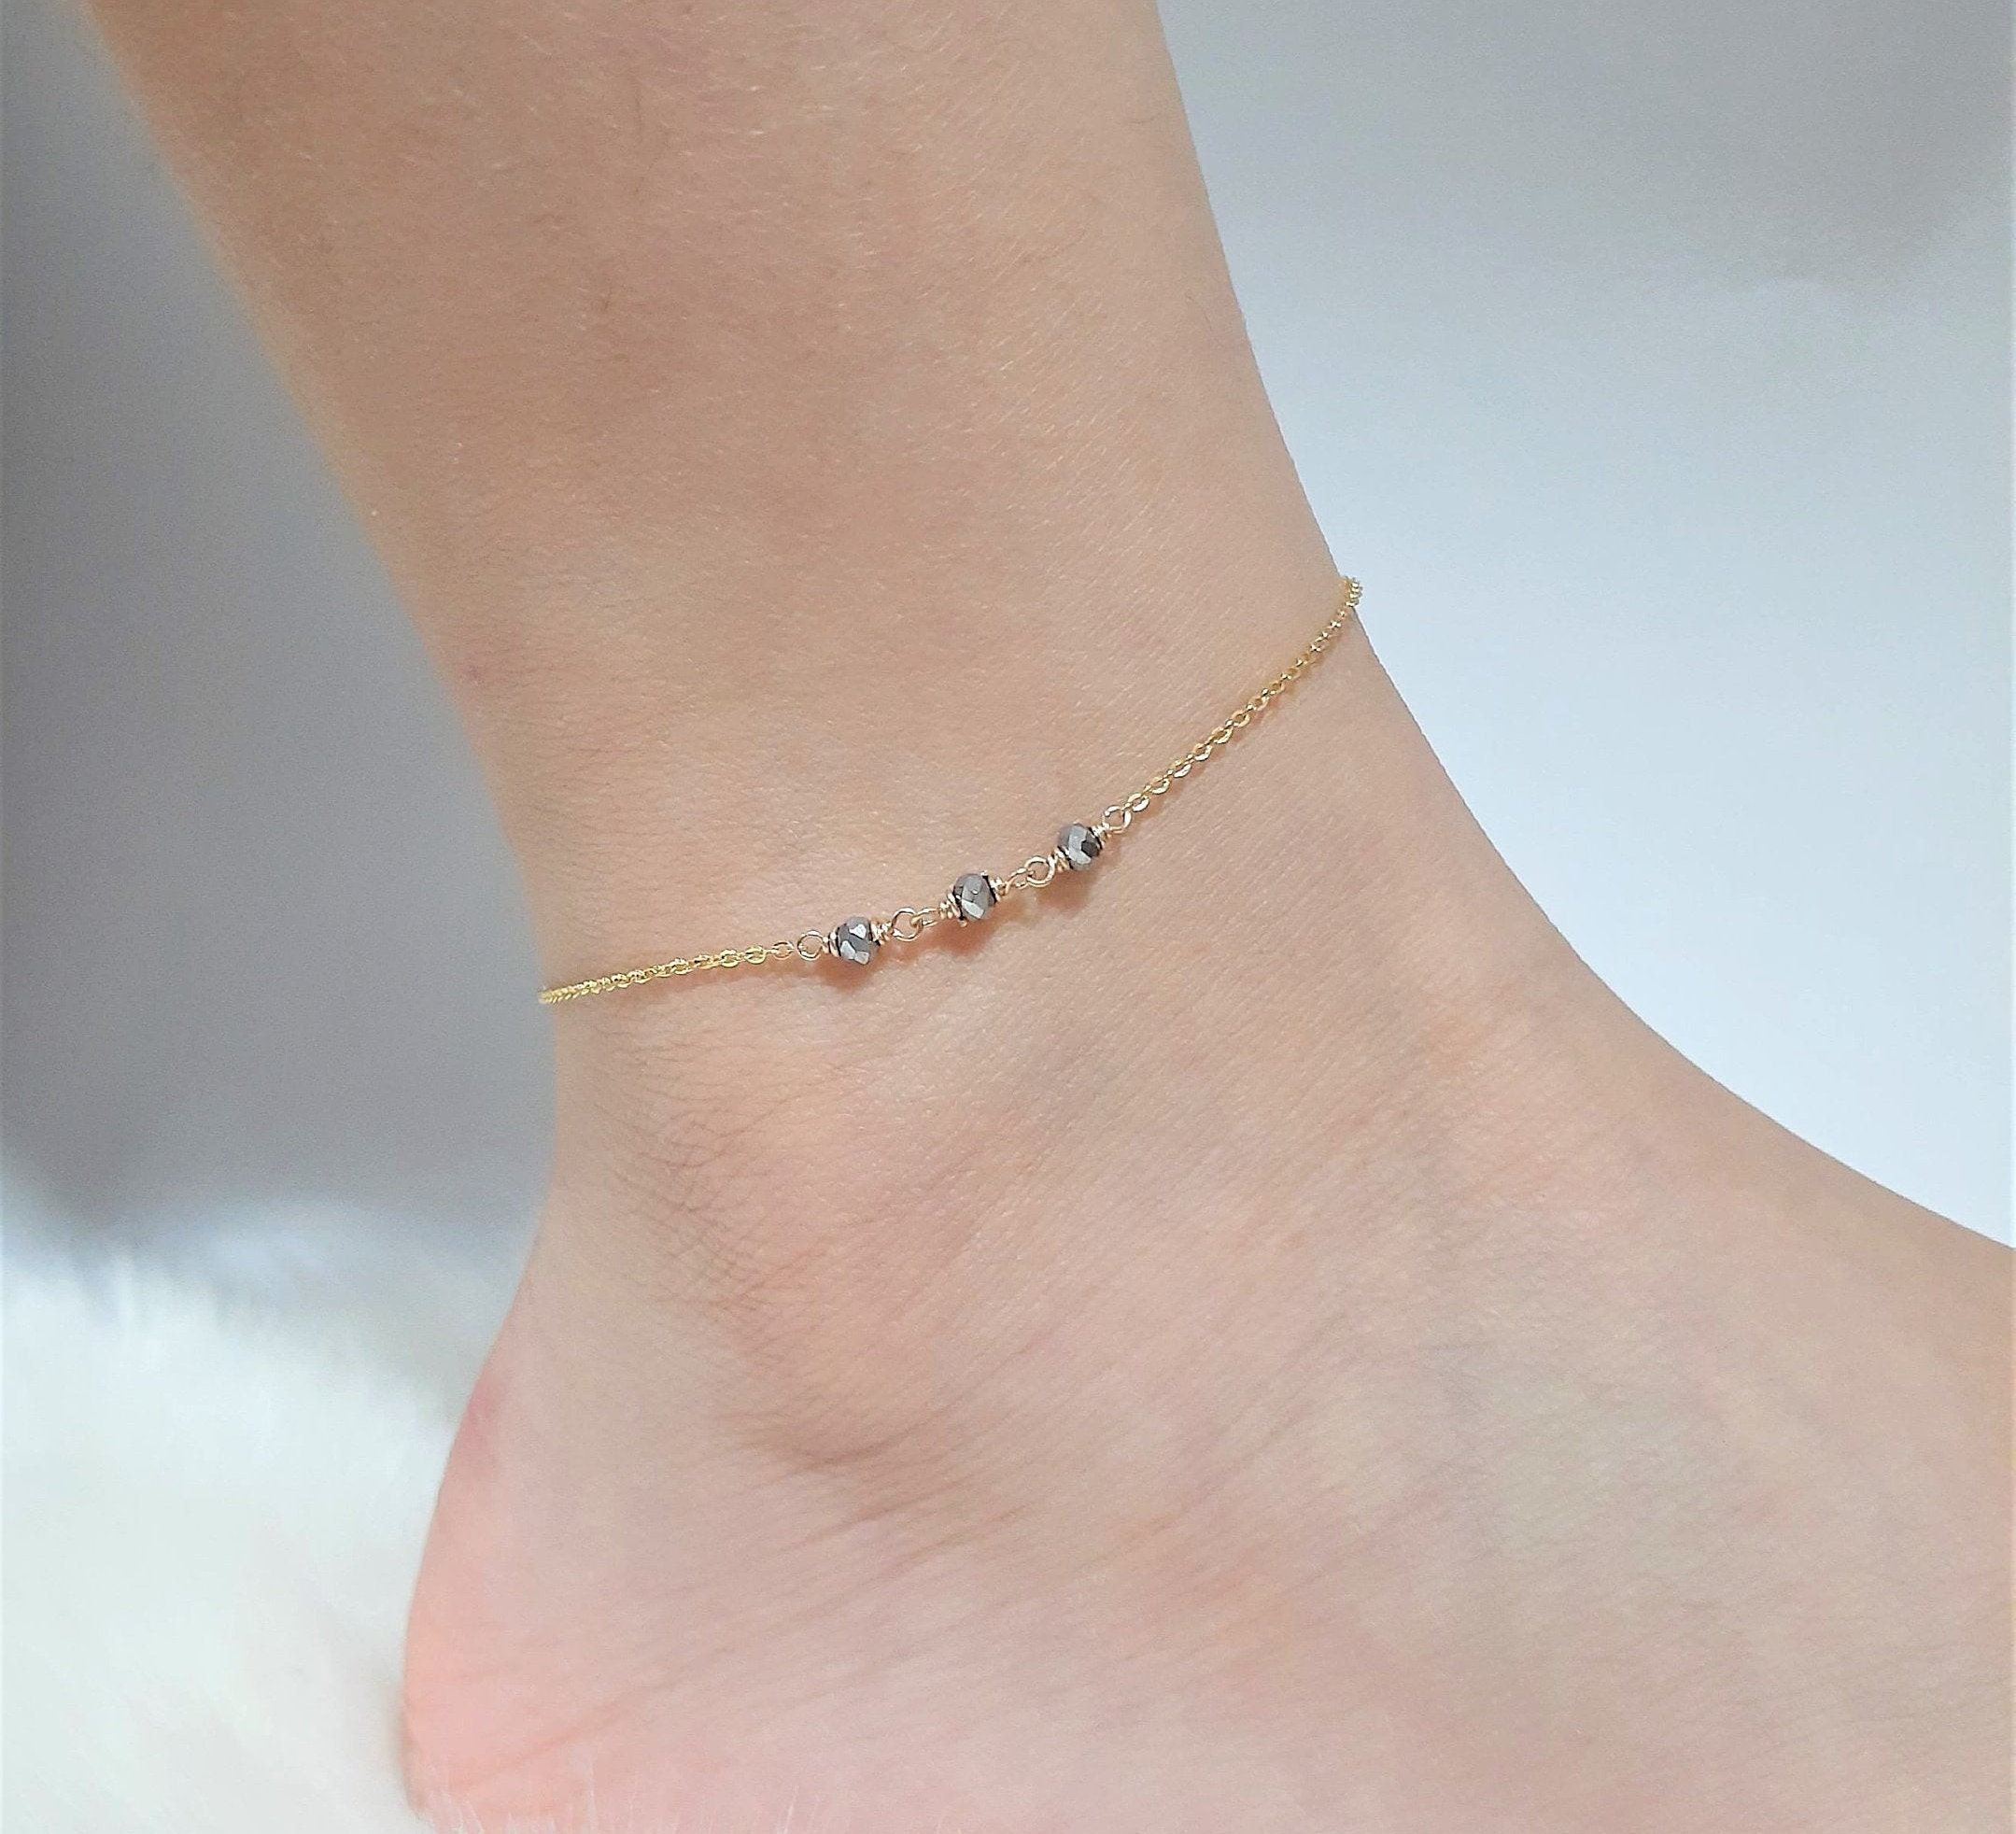 Dainty Two Toned Anklet Silver Pyrite Ankle Bracelet / | Etsy